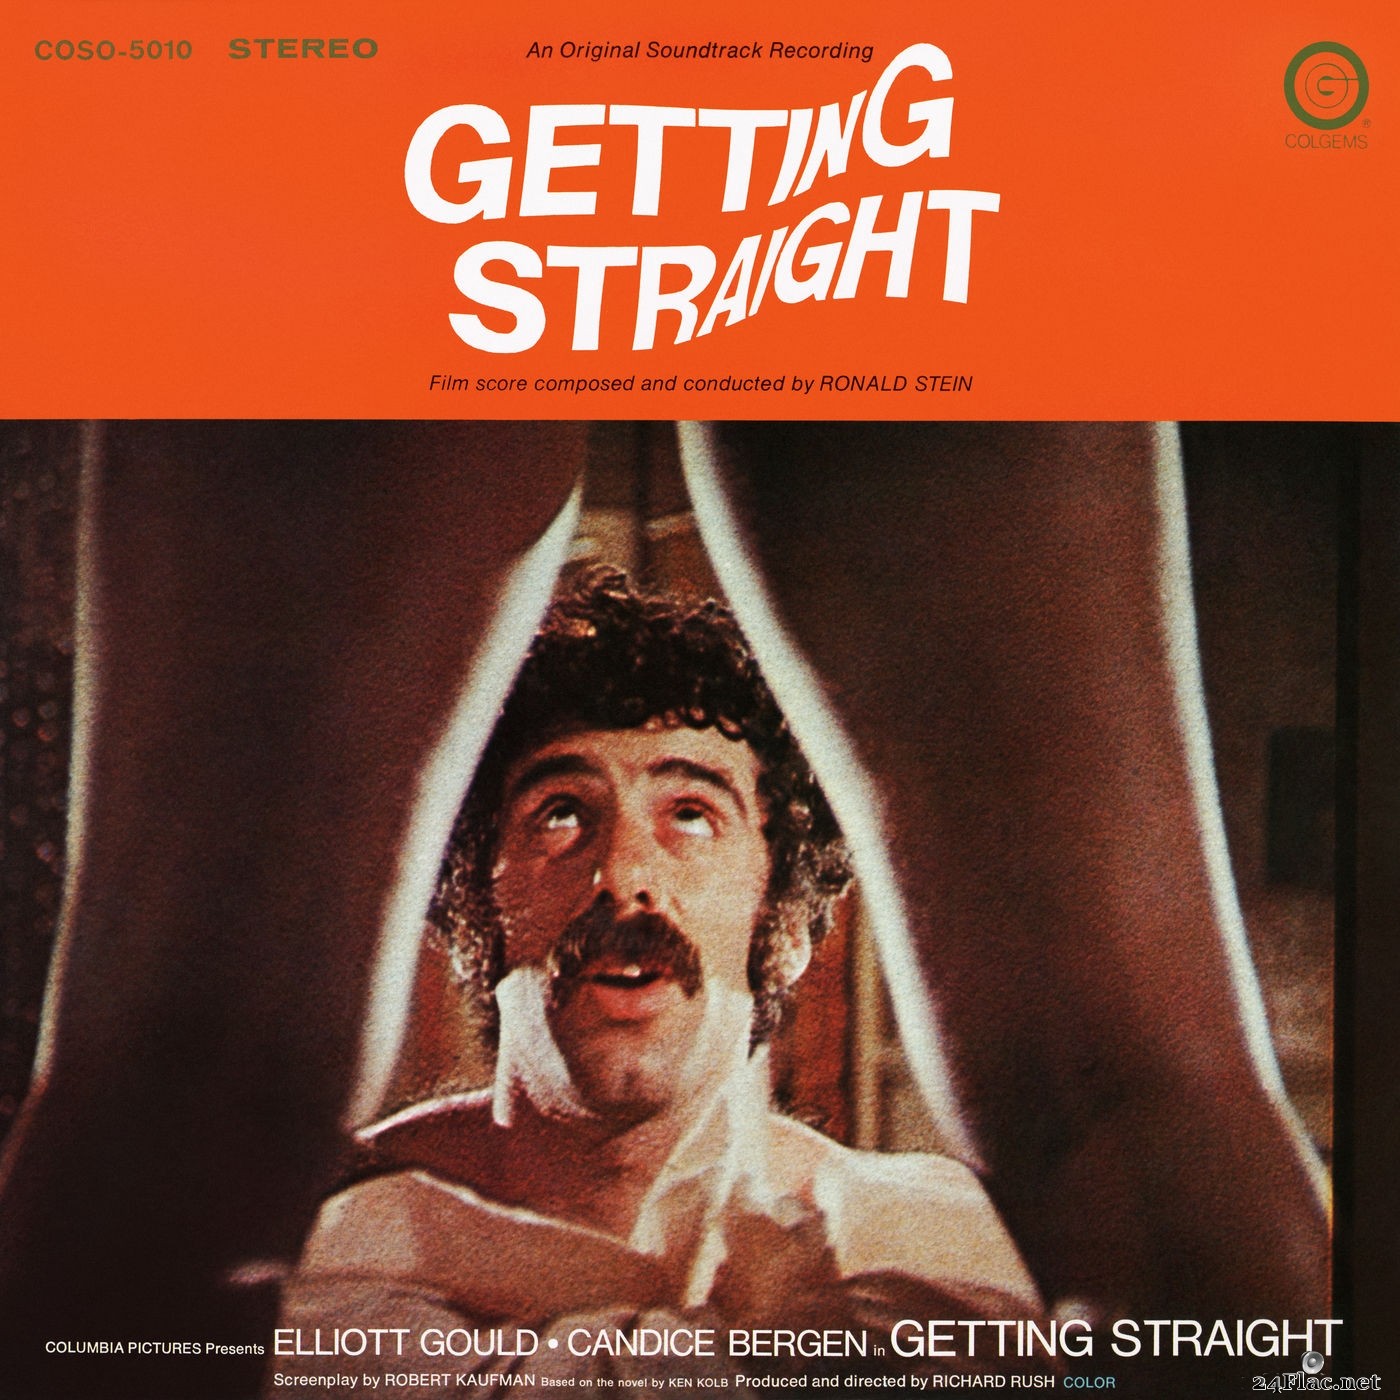 Ronald Stein - Getting Straight (An Original Soundtrack Recording) (2021) Hi-Res